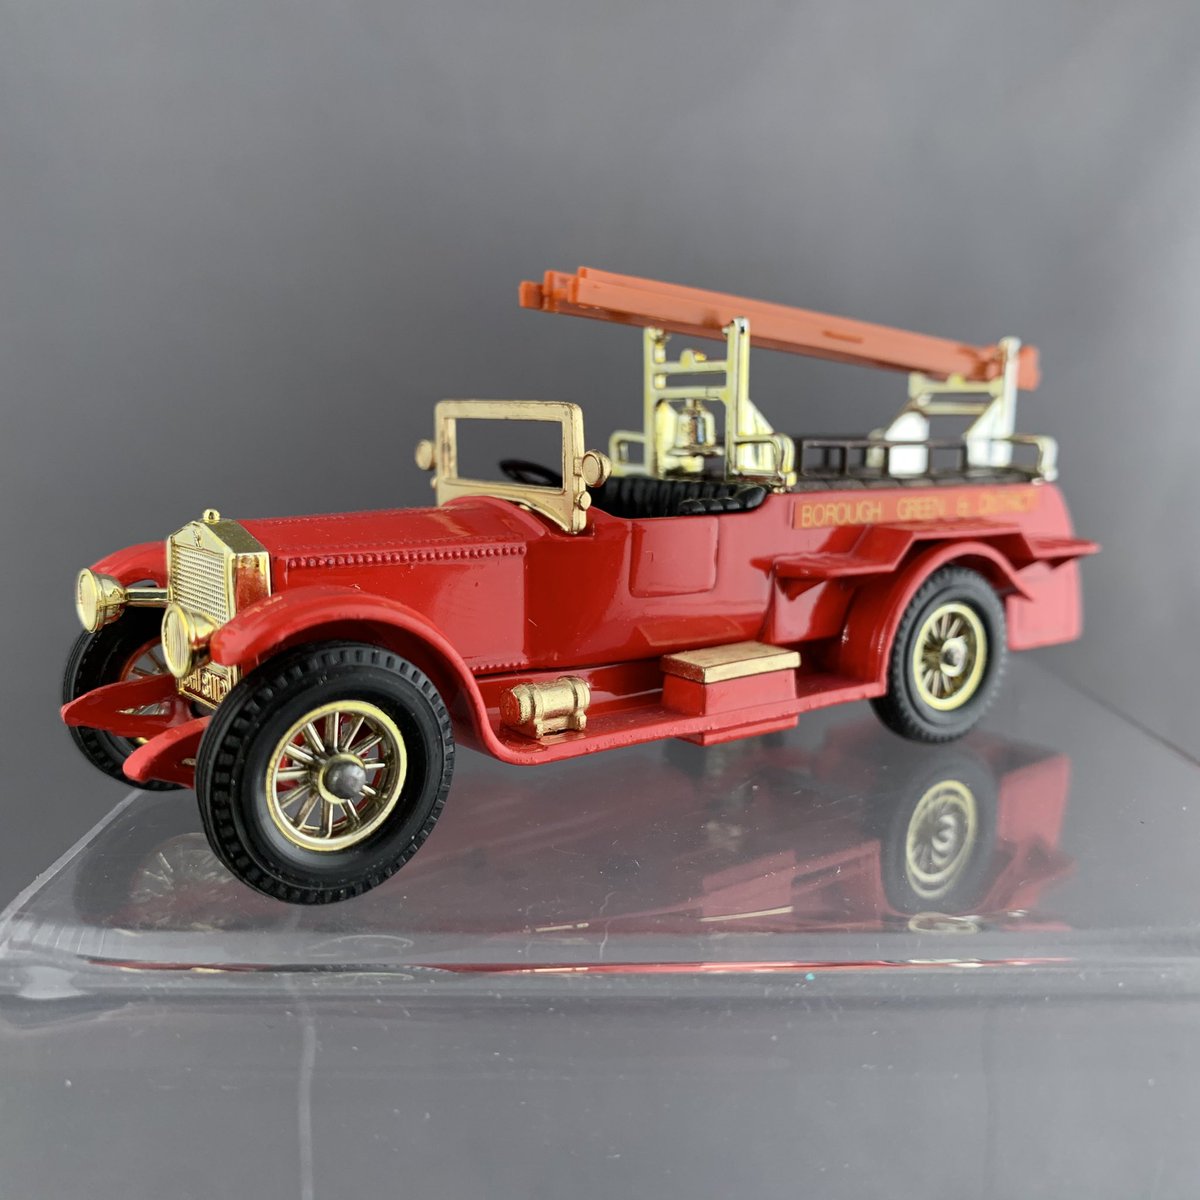 A matchbox fire truck, complete with box.But is it a collector’s item from home or a treasured possession of the Museum?